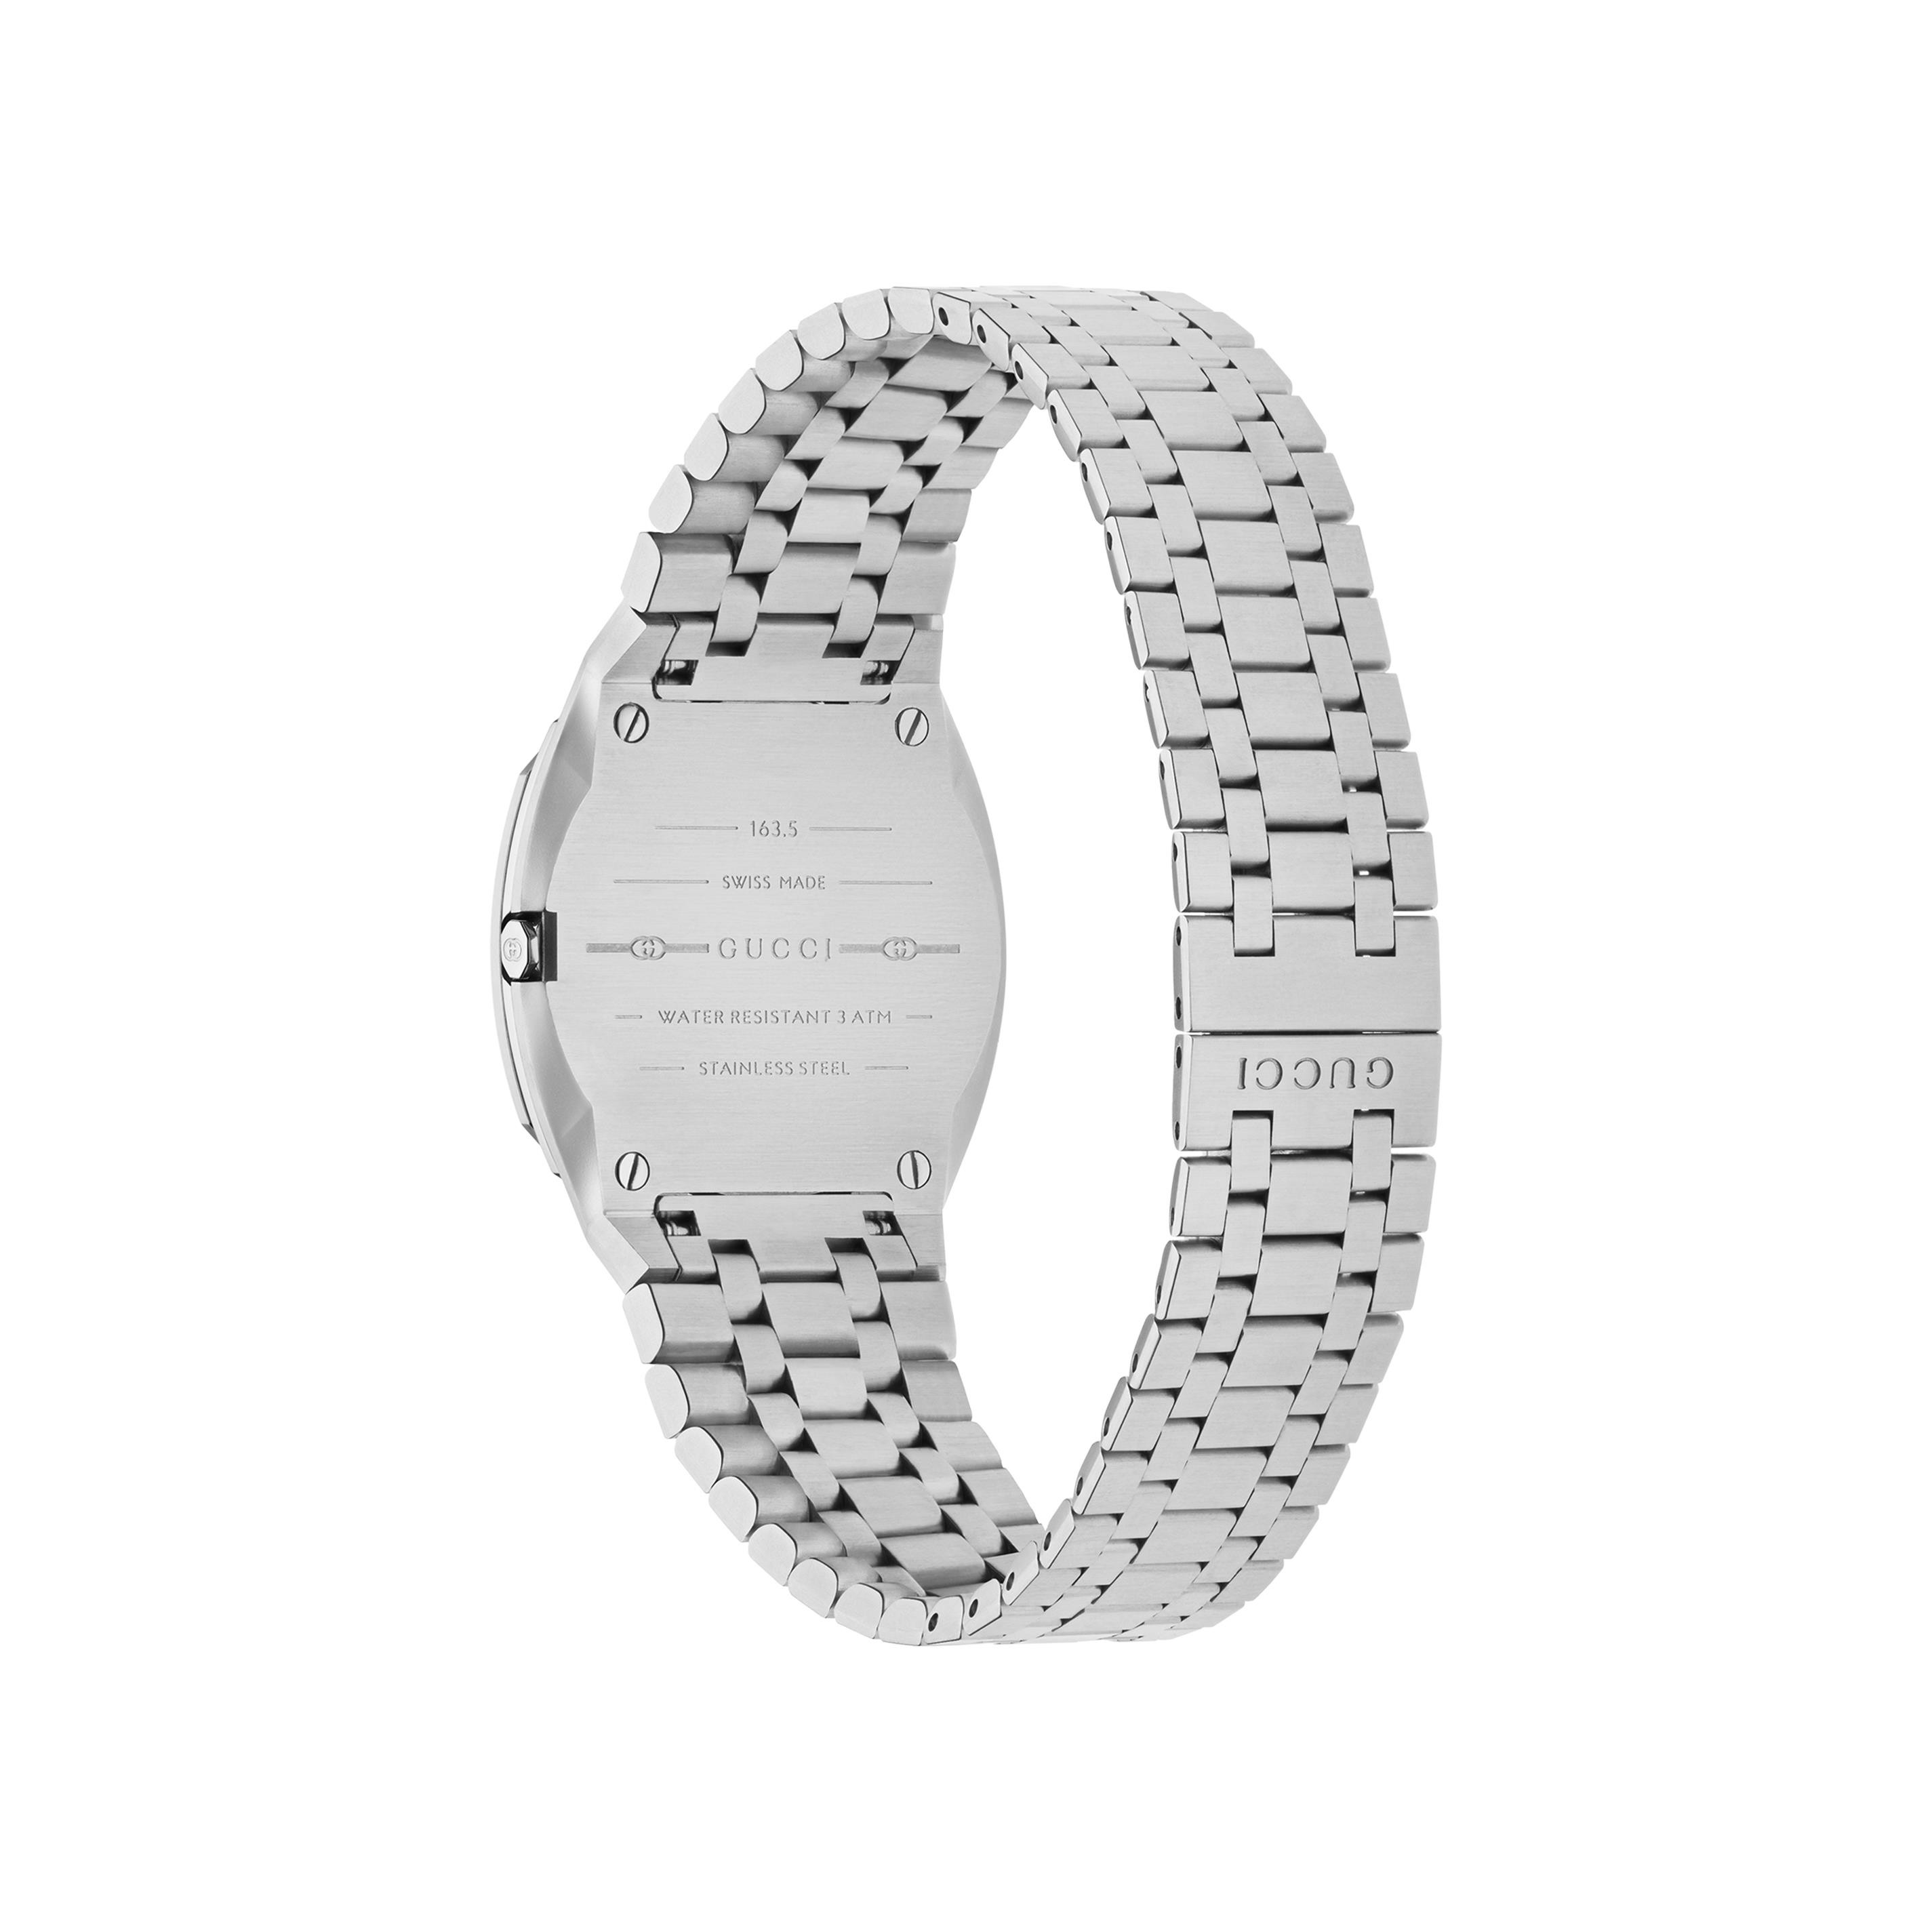 GUCCI 25H Stainless Steel Silver Dial Women's Watch